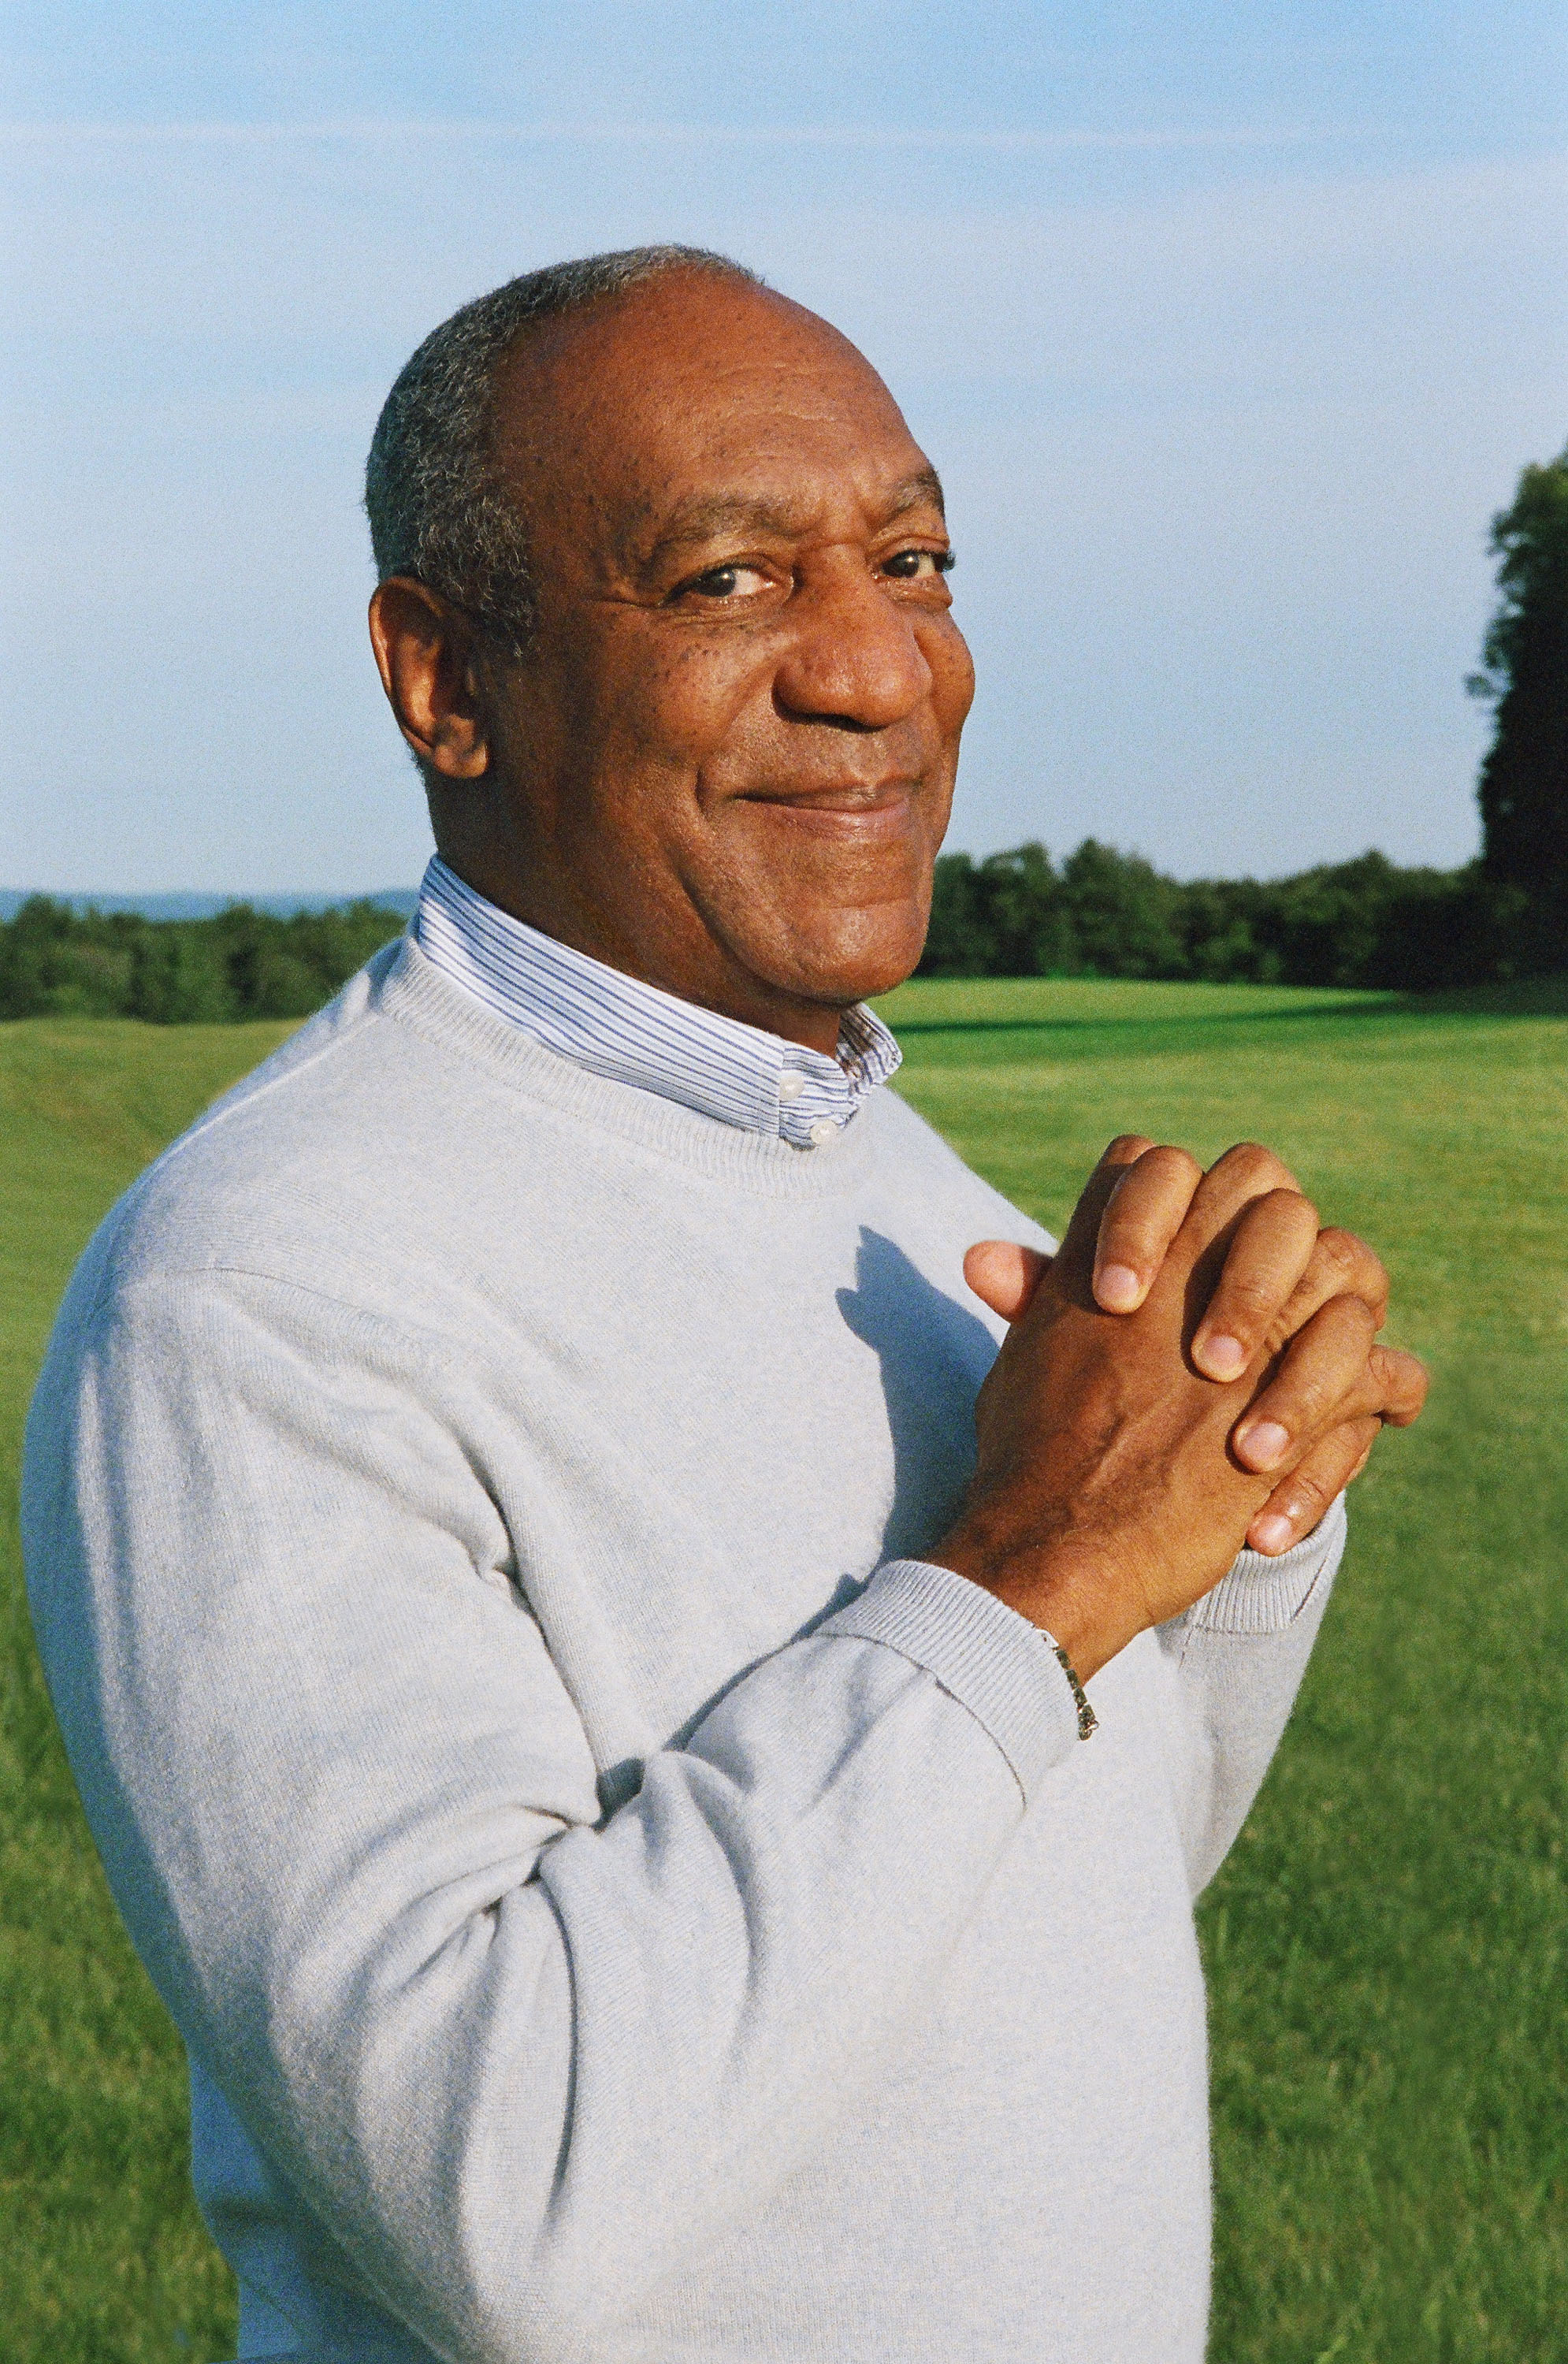 Comedian Bill Cosby photographed on his Massachusetts property considered for survey for the TGP gas pipeline.